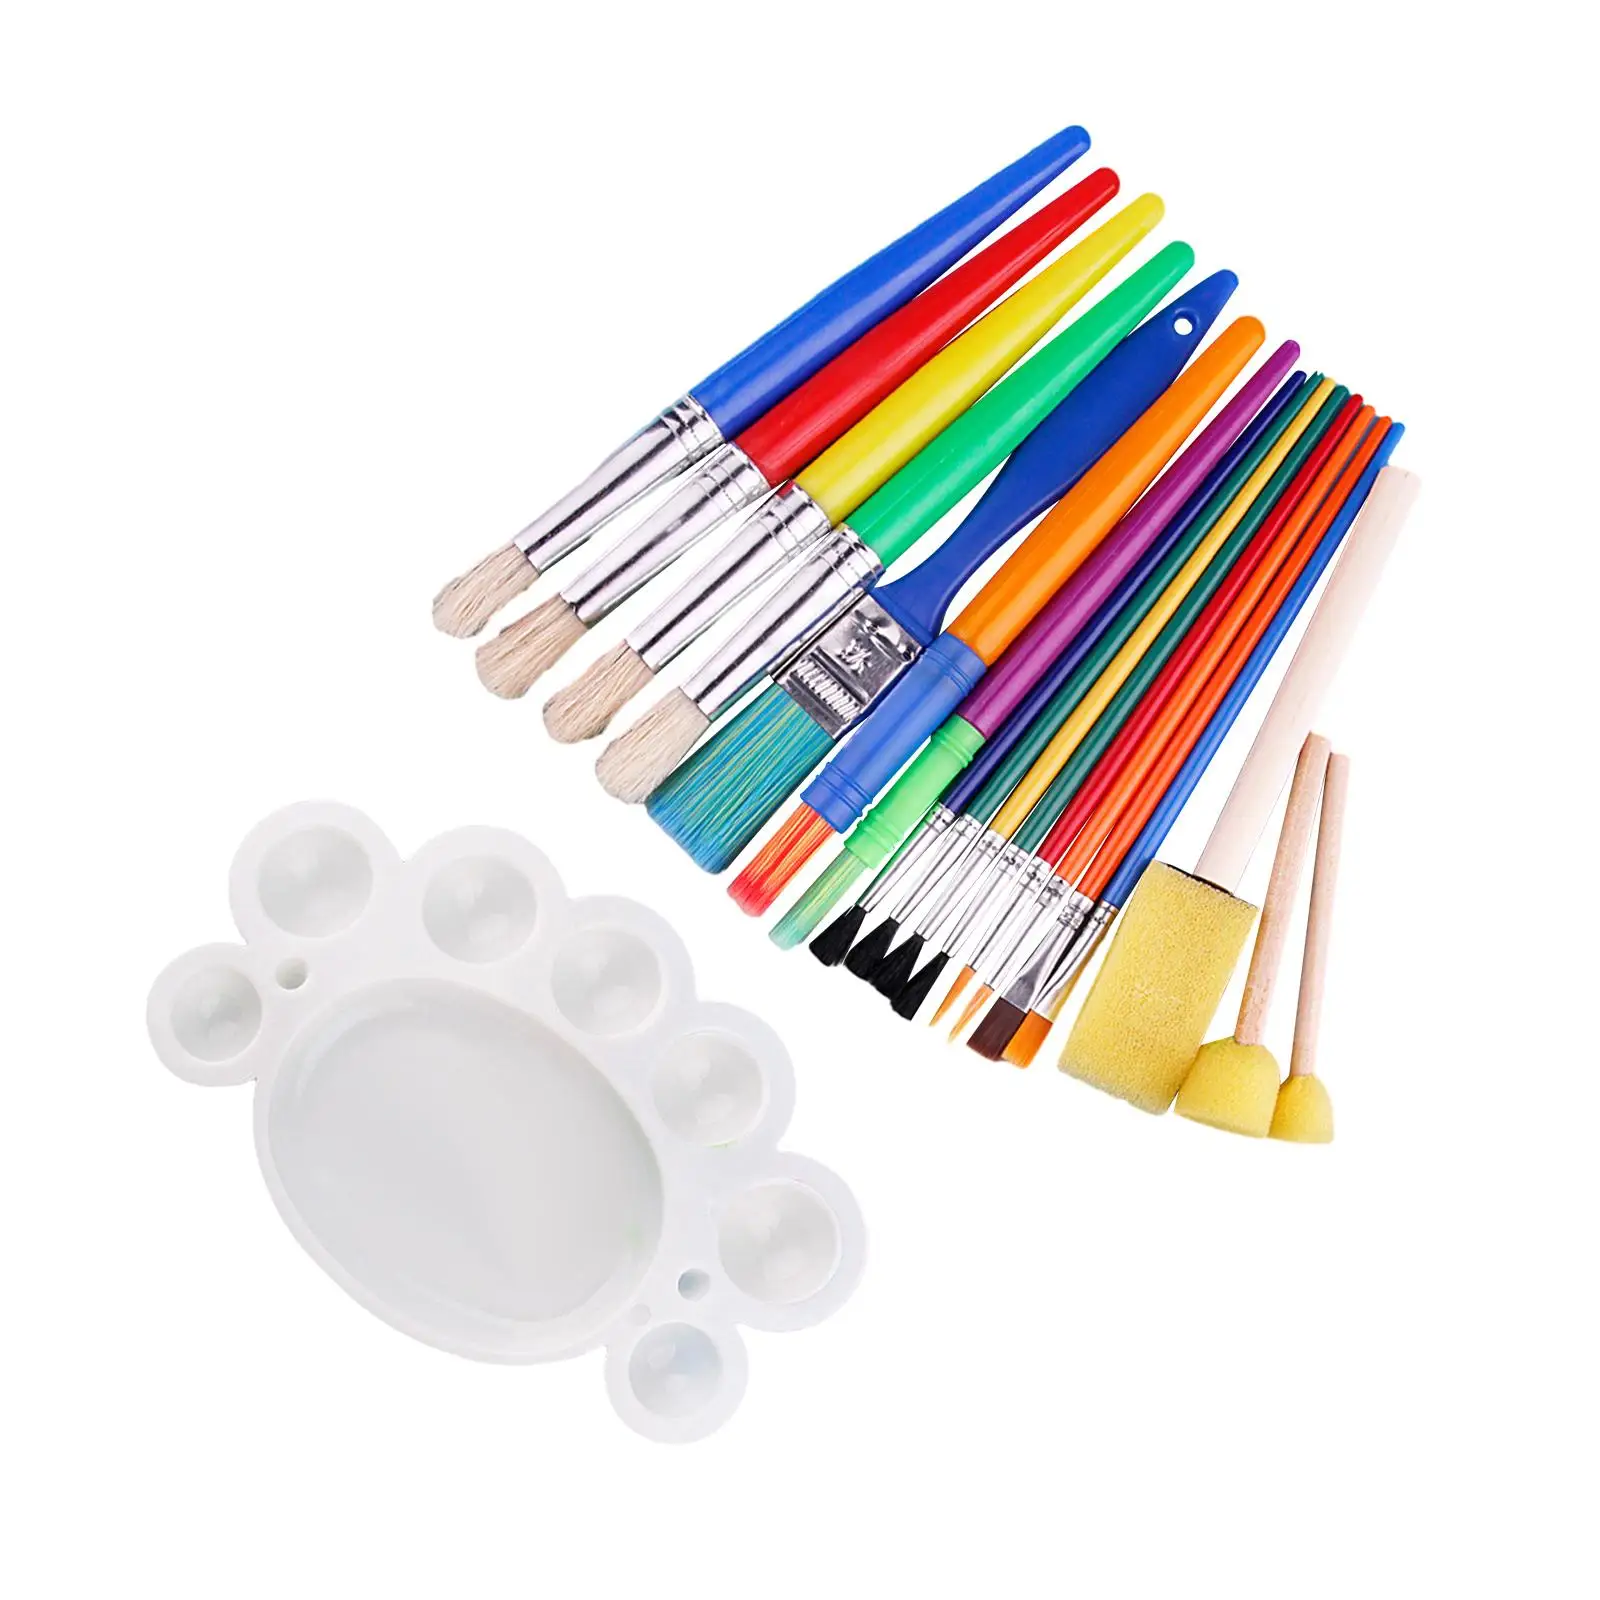 19Pcs Paint Brush Set Watercolor Acrylic Paint Boys and Girls Portable Child Adults Crafting Tools Art Supplies Painting Brushes